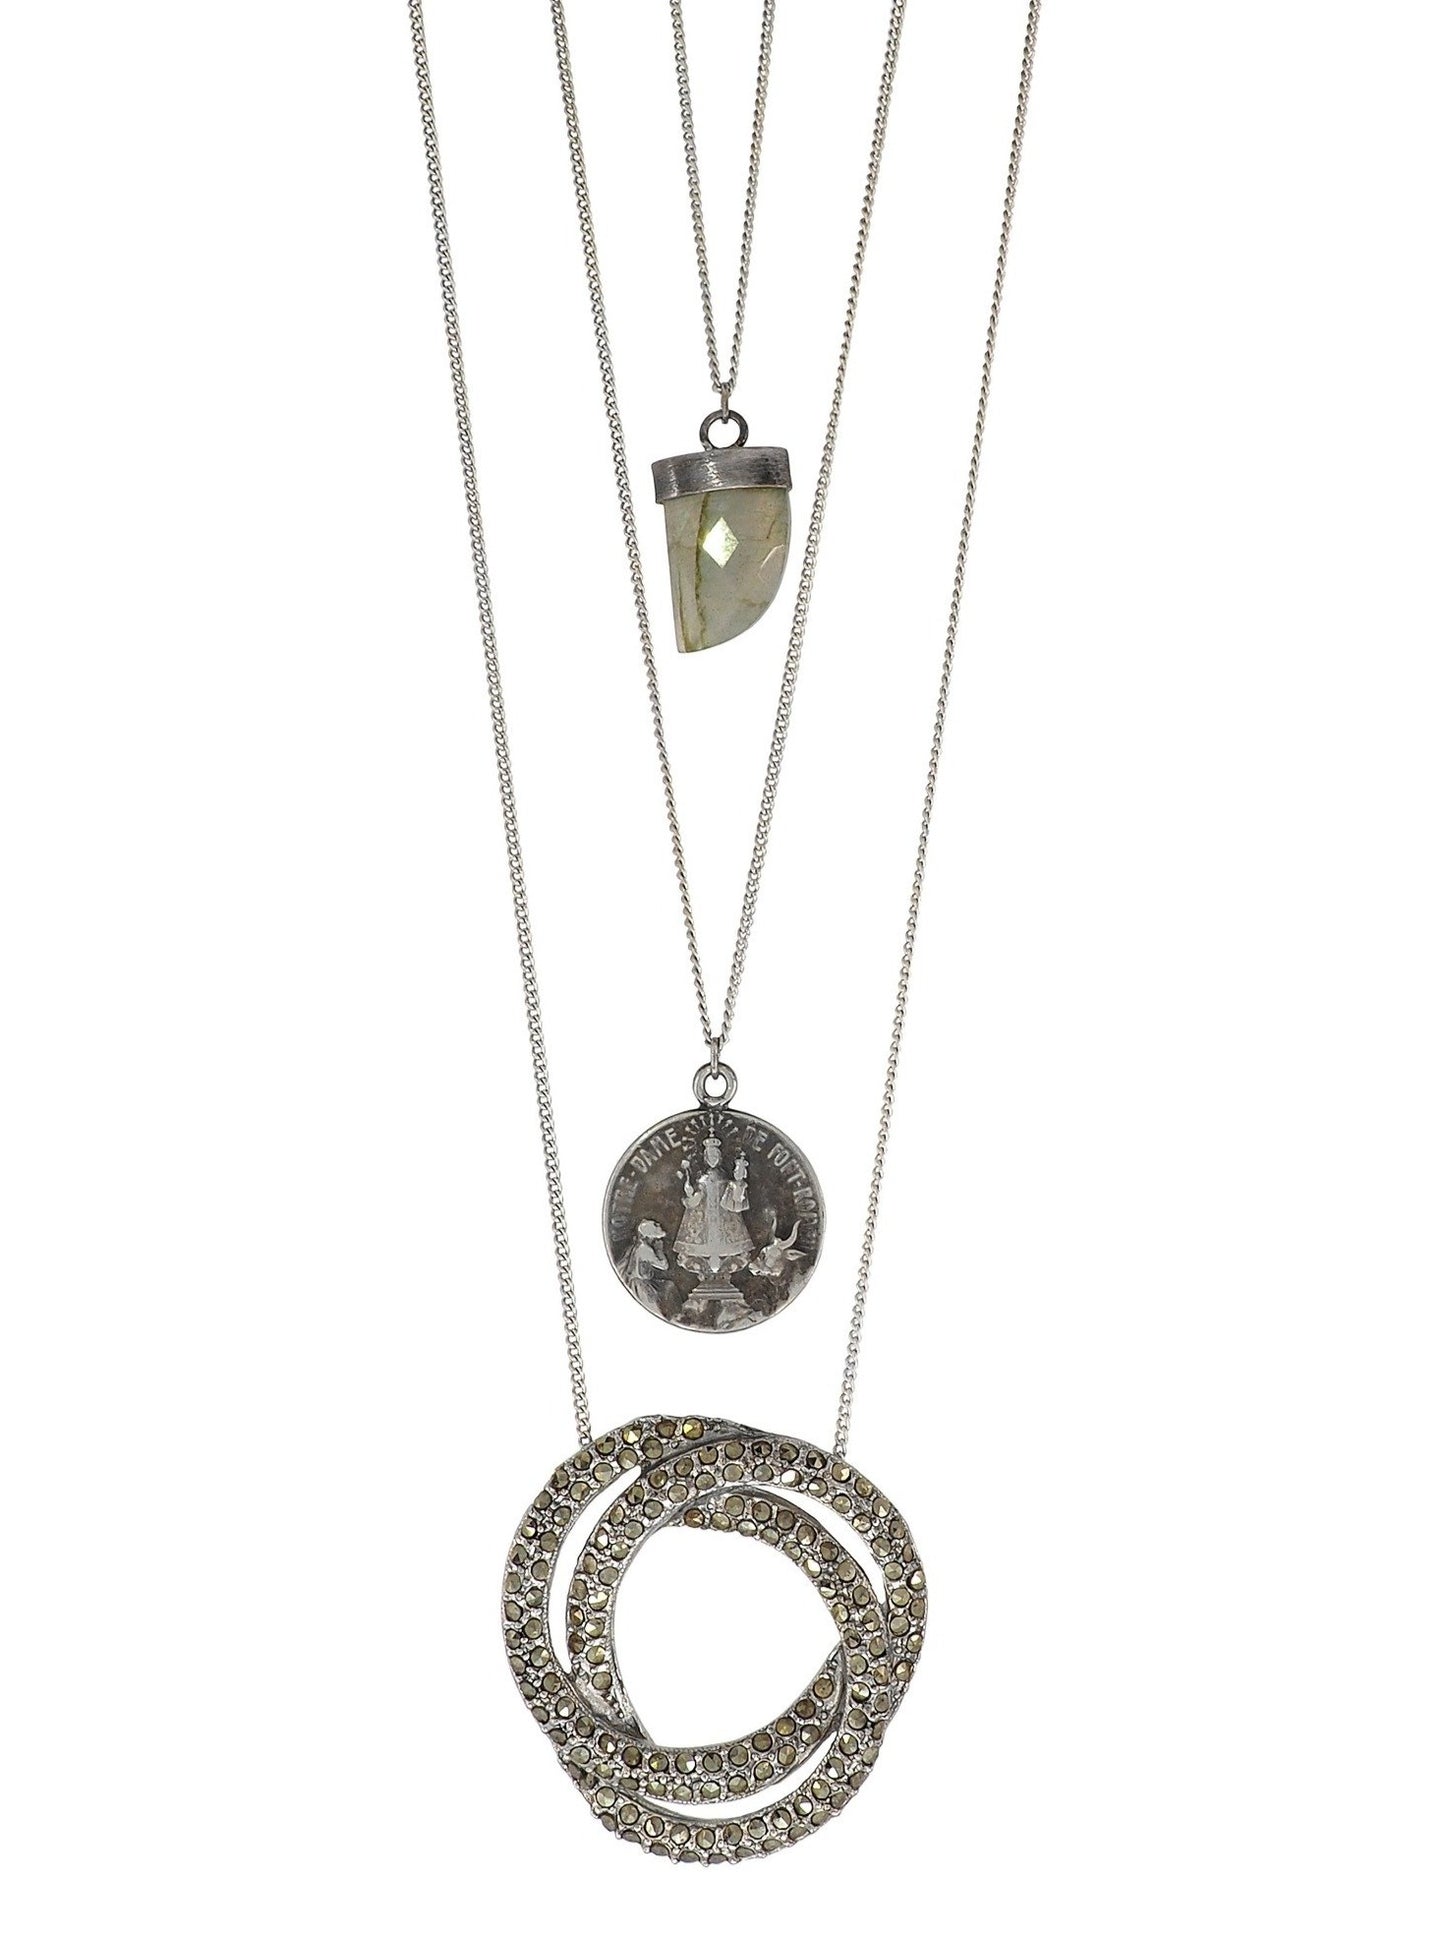 Three layered Silver plated Necklace feat. a gorgeous Crystal incrusted Antique Pendant, an antique holy "Notre Dame de Font Romeu" from France and a Labradorite Crystal set in Oxidized Silver